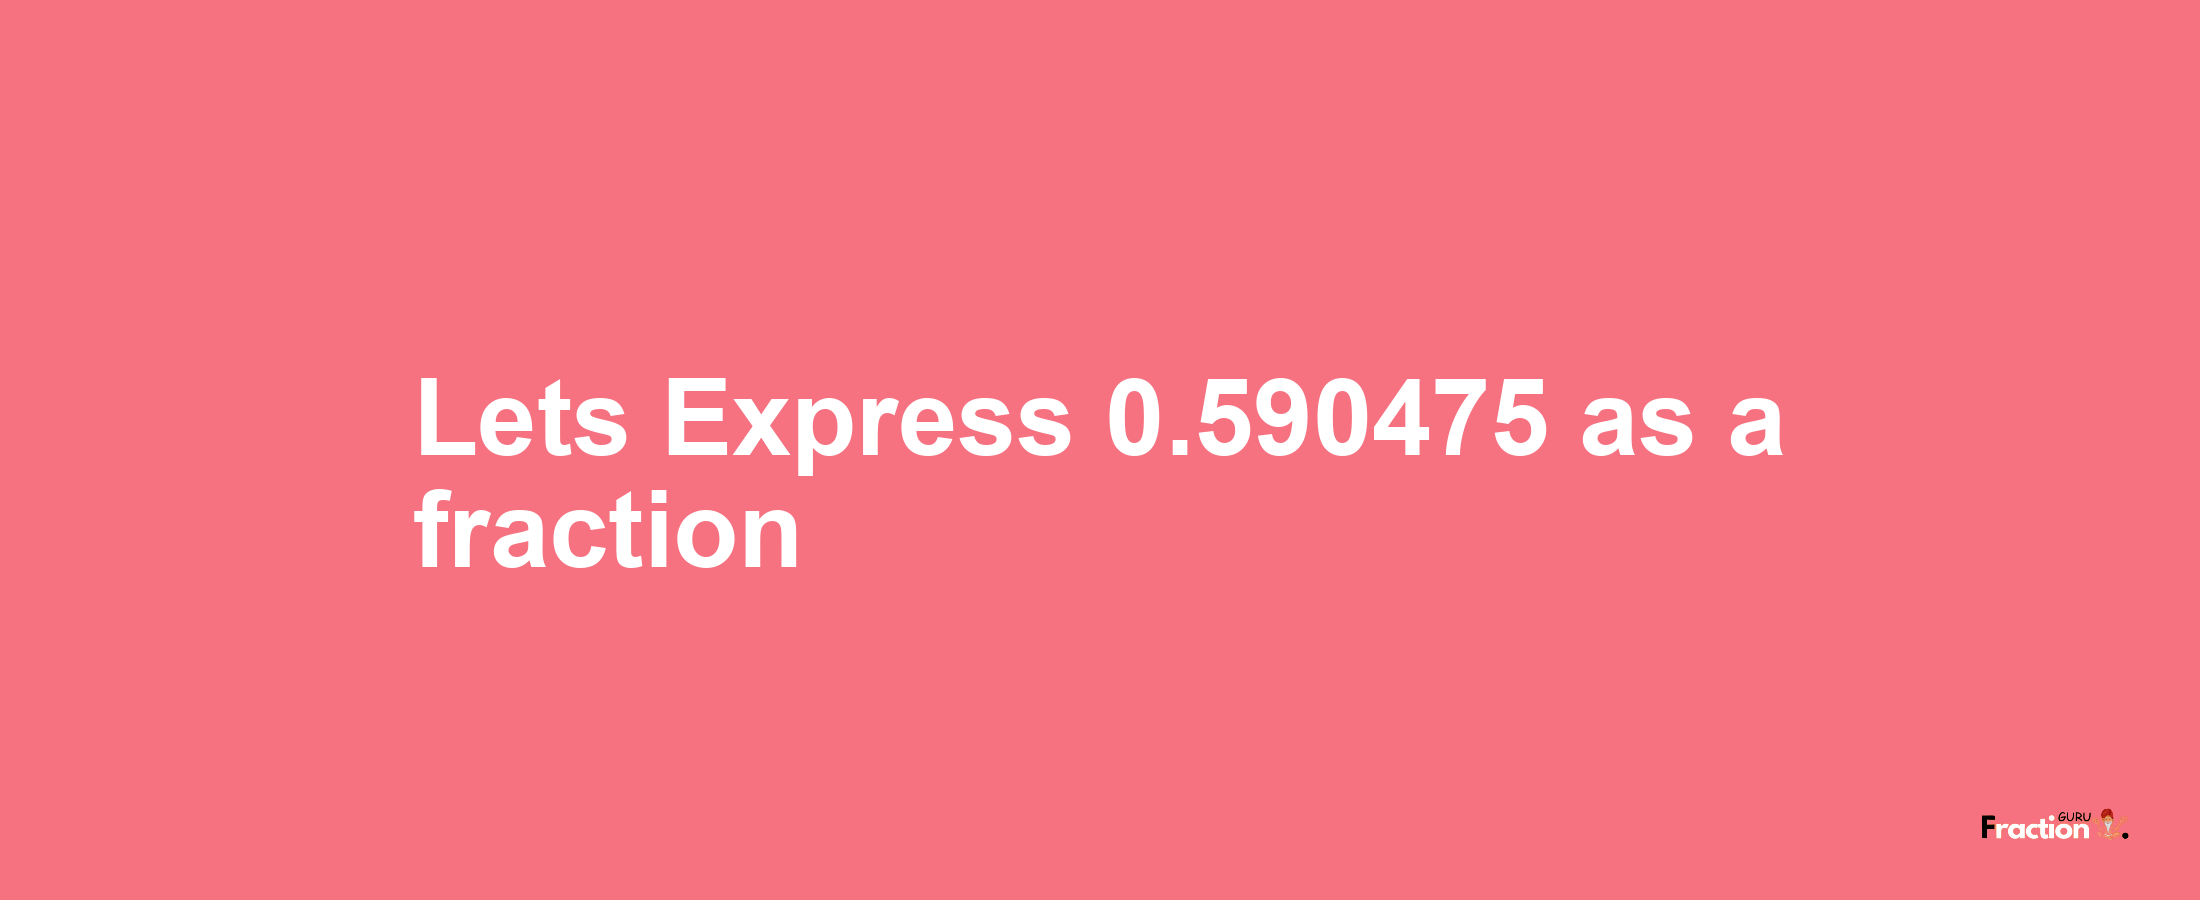 Lets Express 0.590475 as afraction